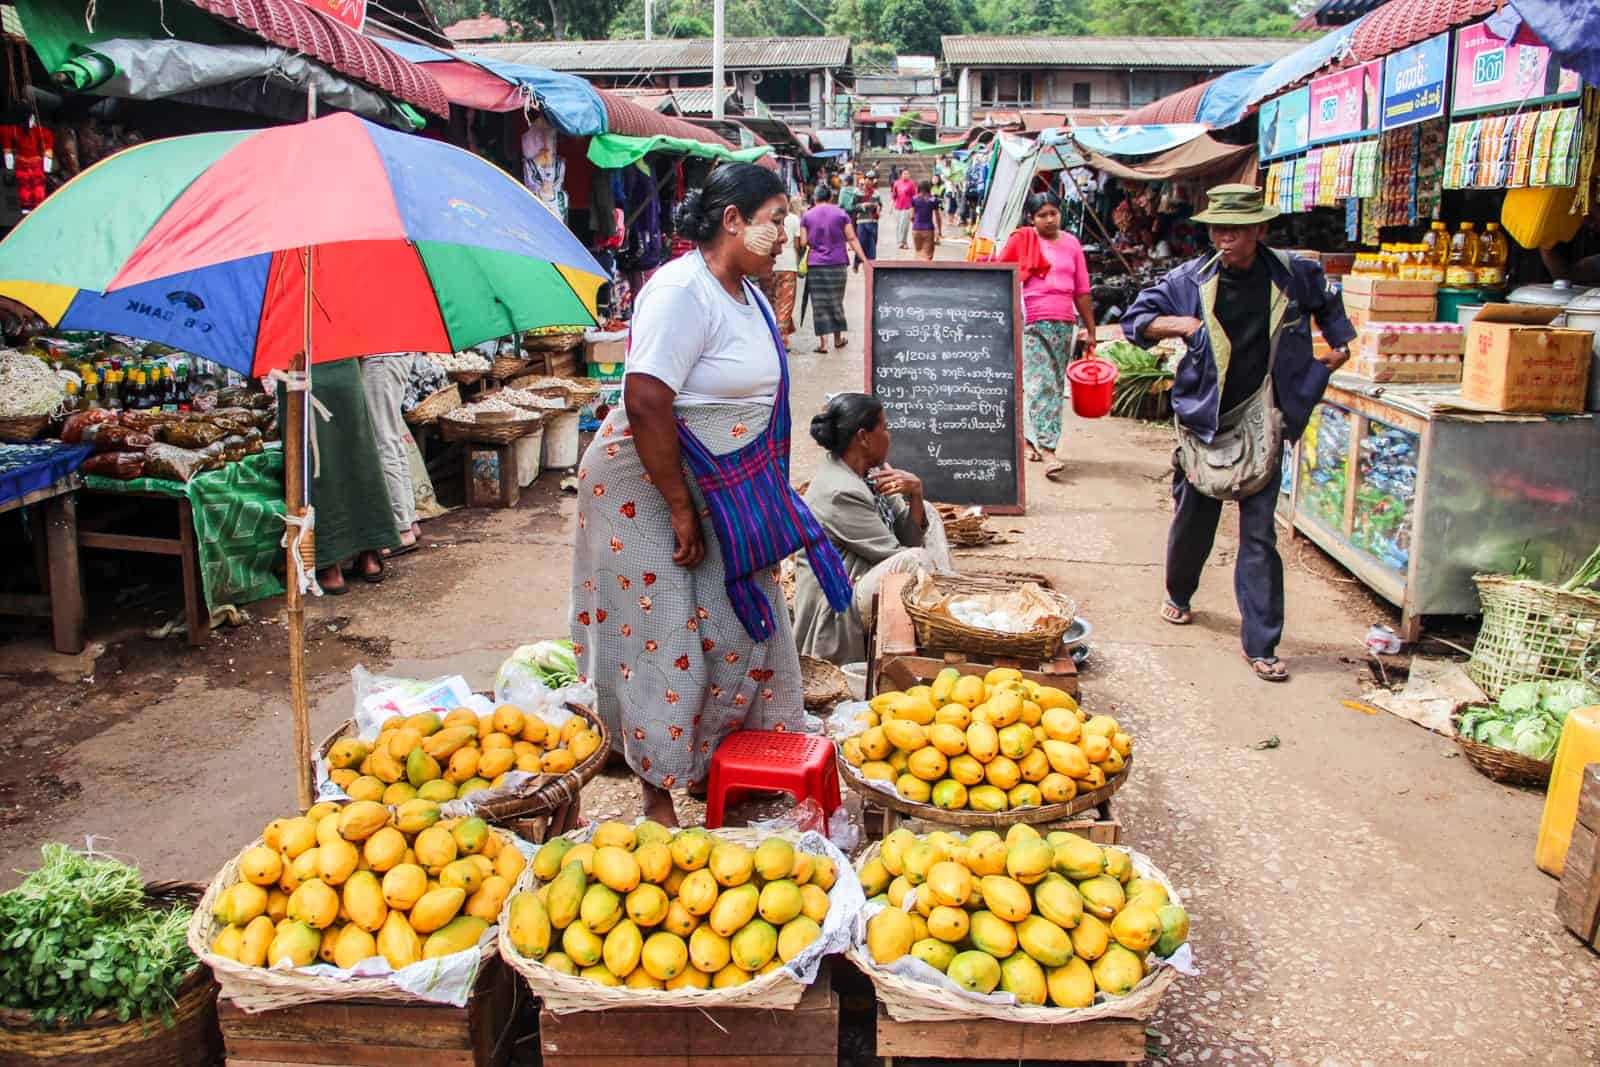 A woman wearing a purple bag by her stall in a local market in Myanmar, with five stands of bright yellow mangoes and a red-blue-green-yellow umbrella. Rows of stalls on either side of the street can be seen in the background.